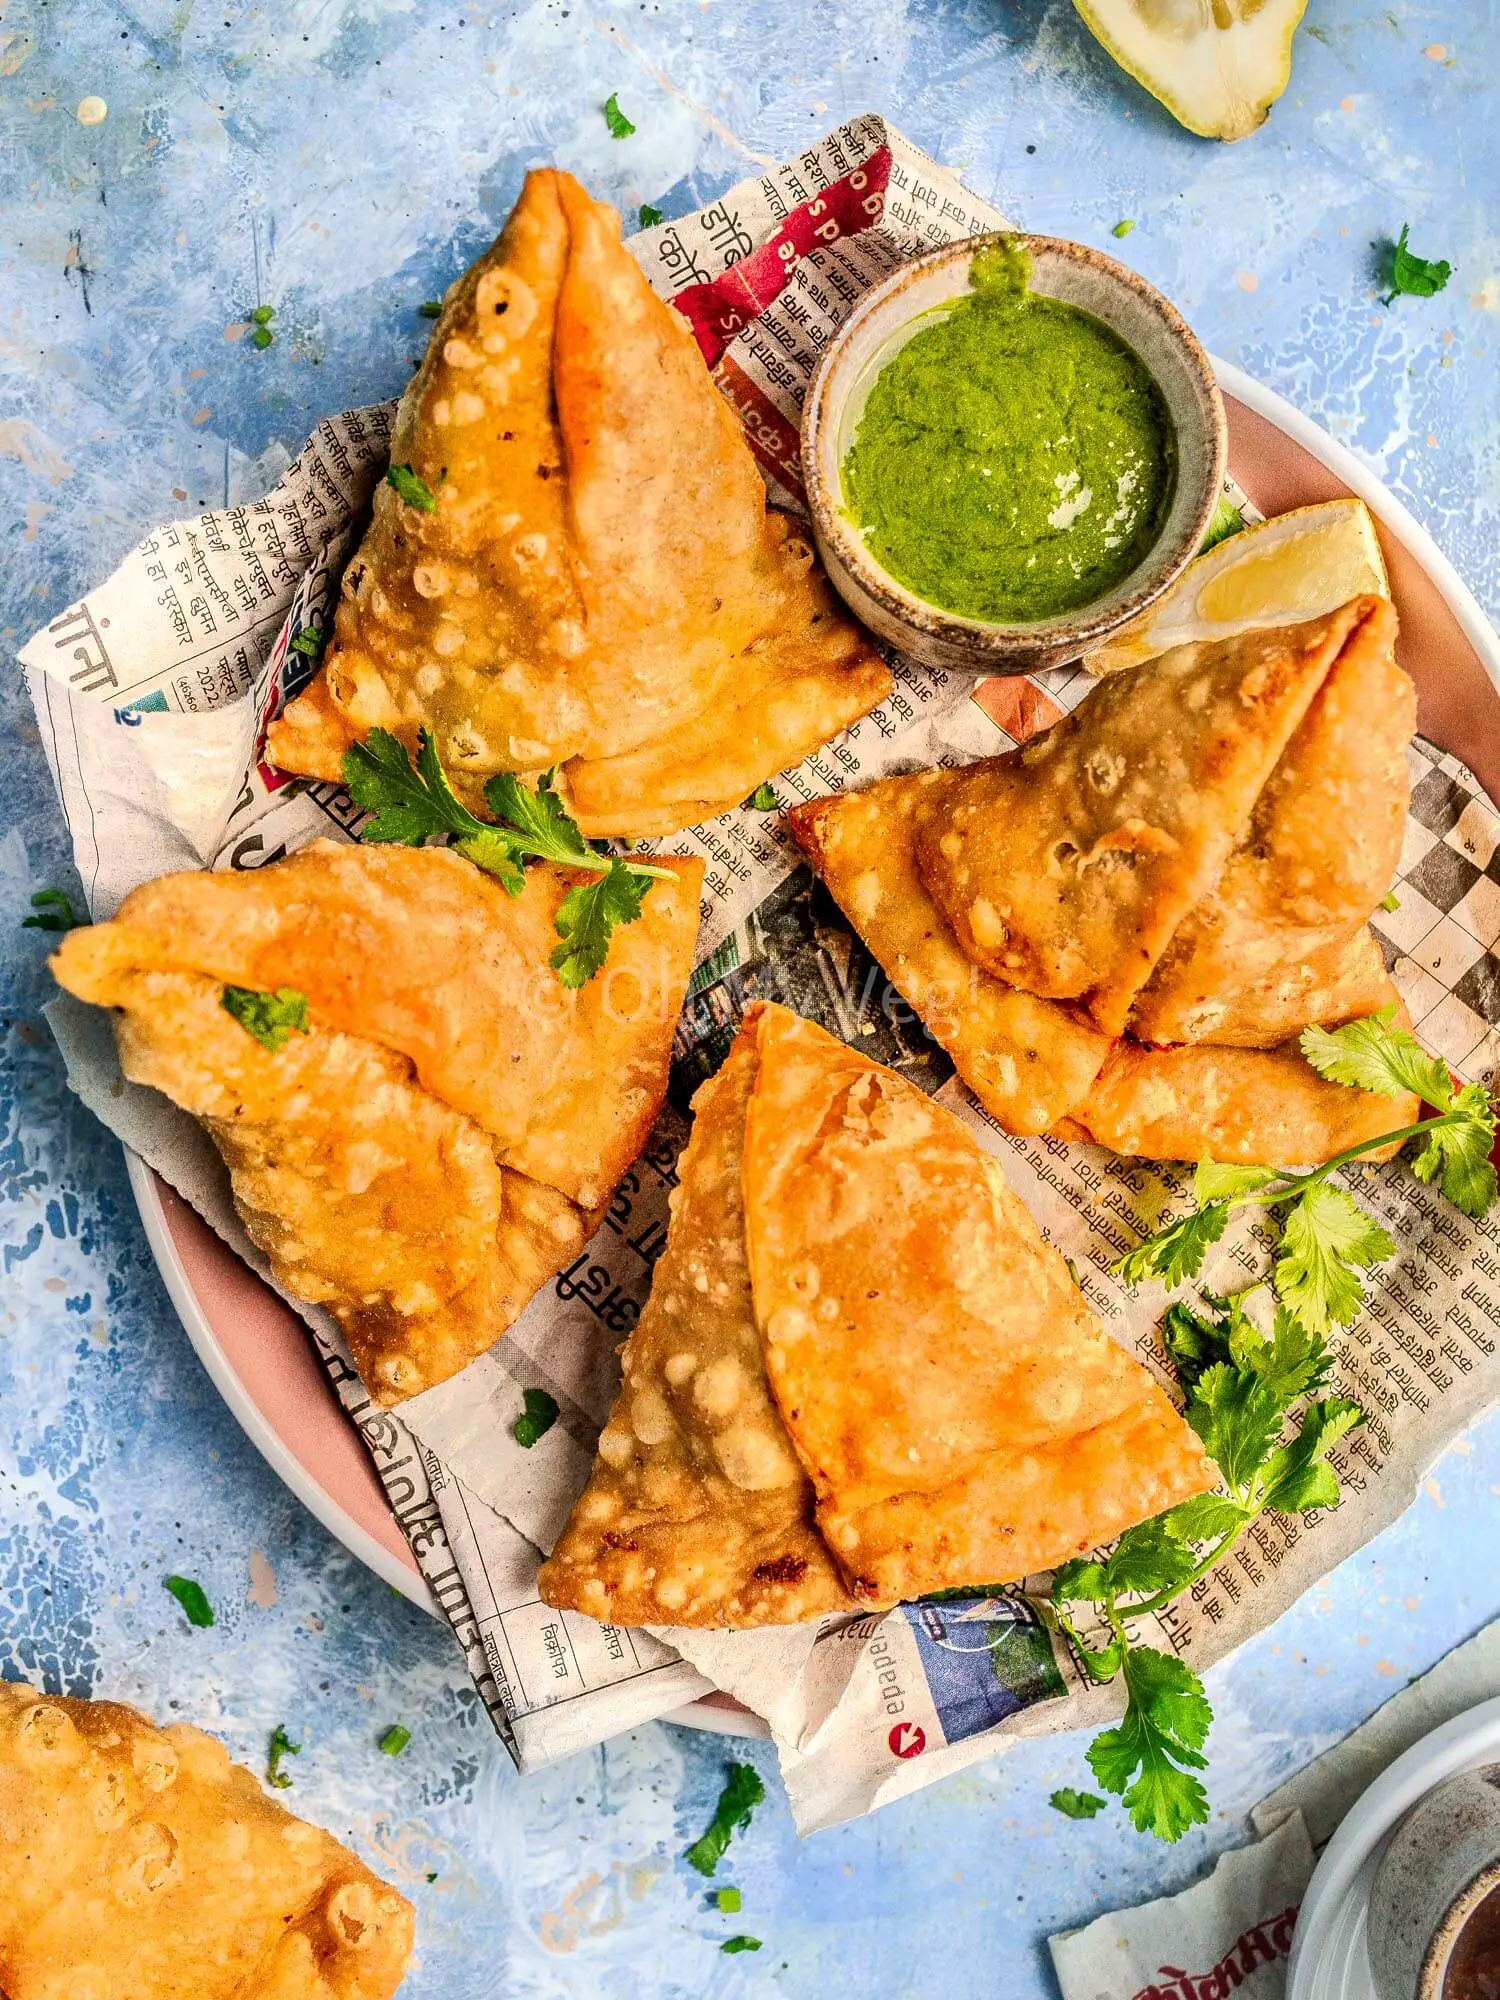 Punjabi vegetable samosa on a plate with a pot of green chutney.